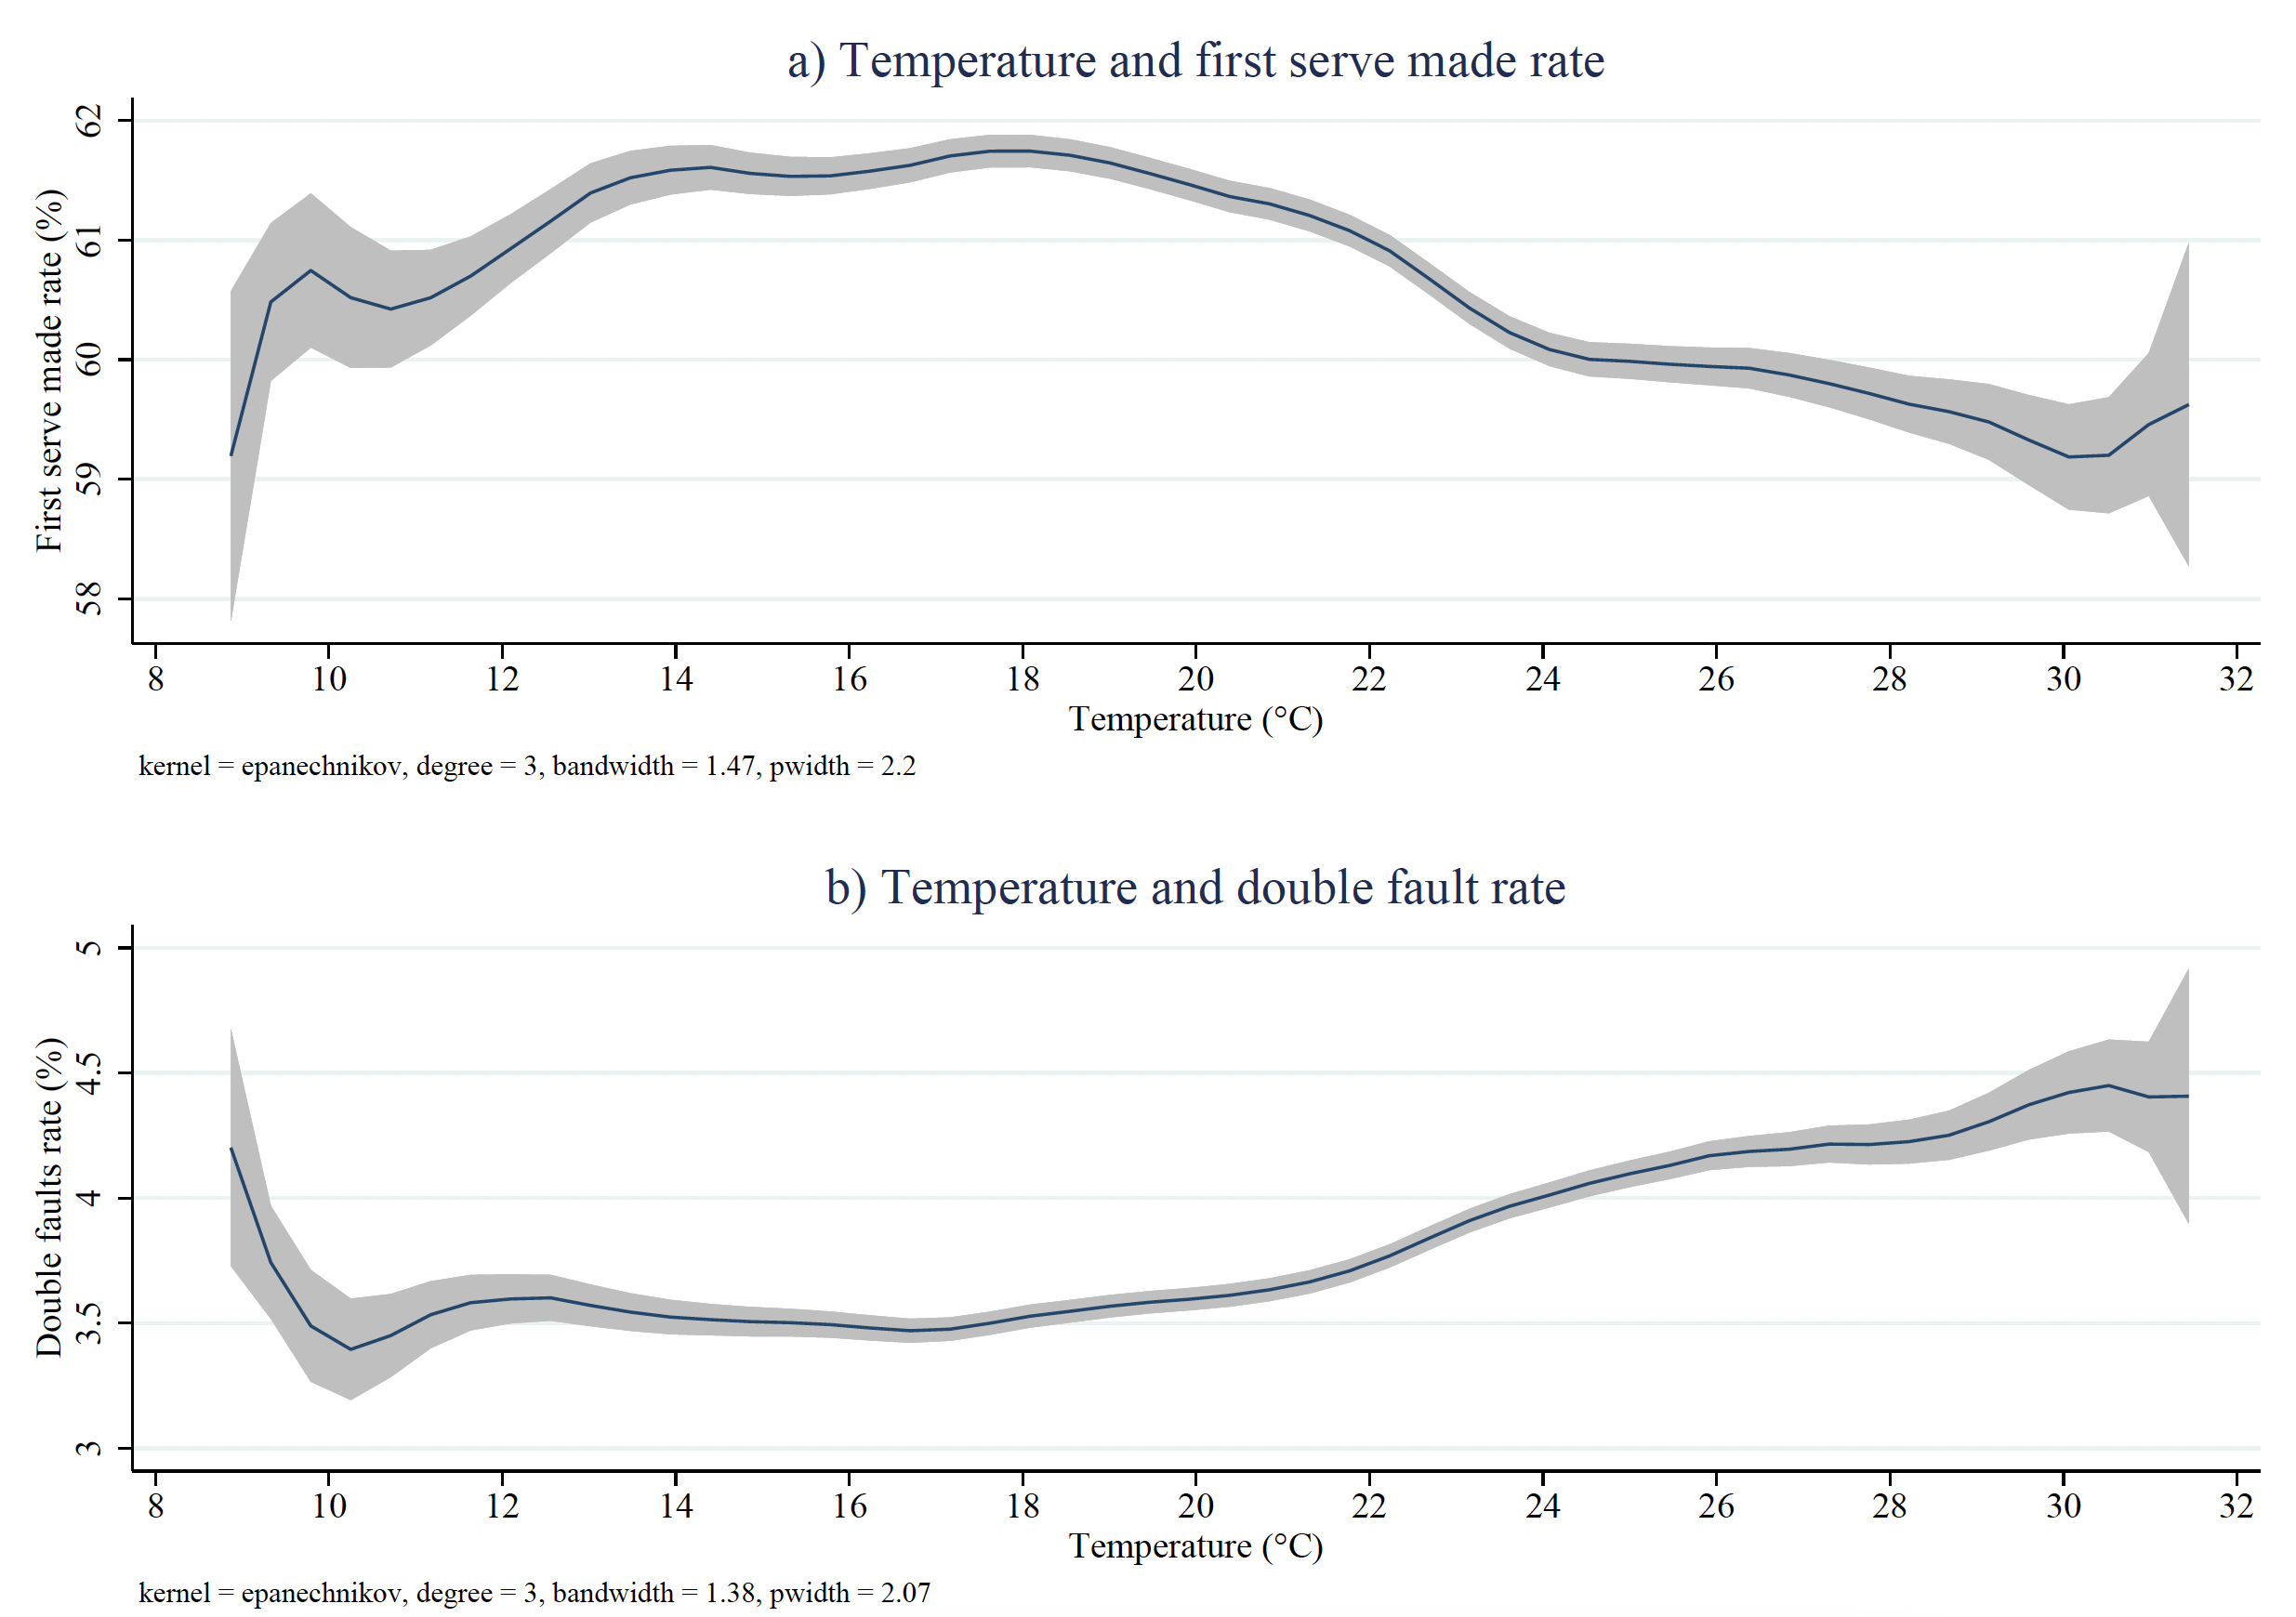 Figure 1 Smoothened relation between temperature and tennis performance